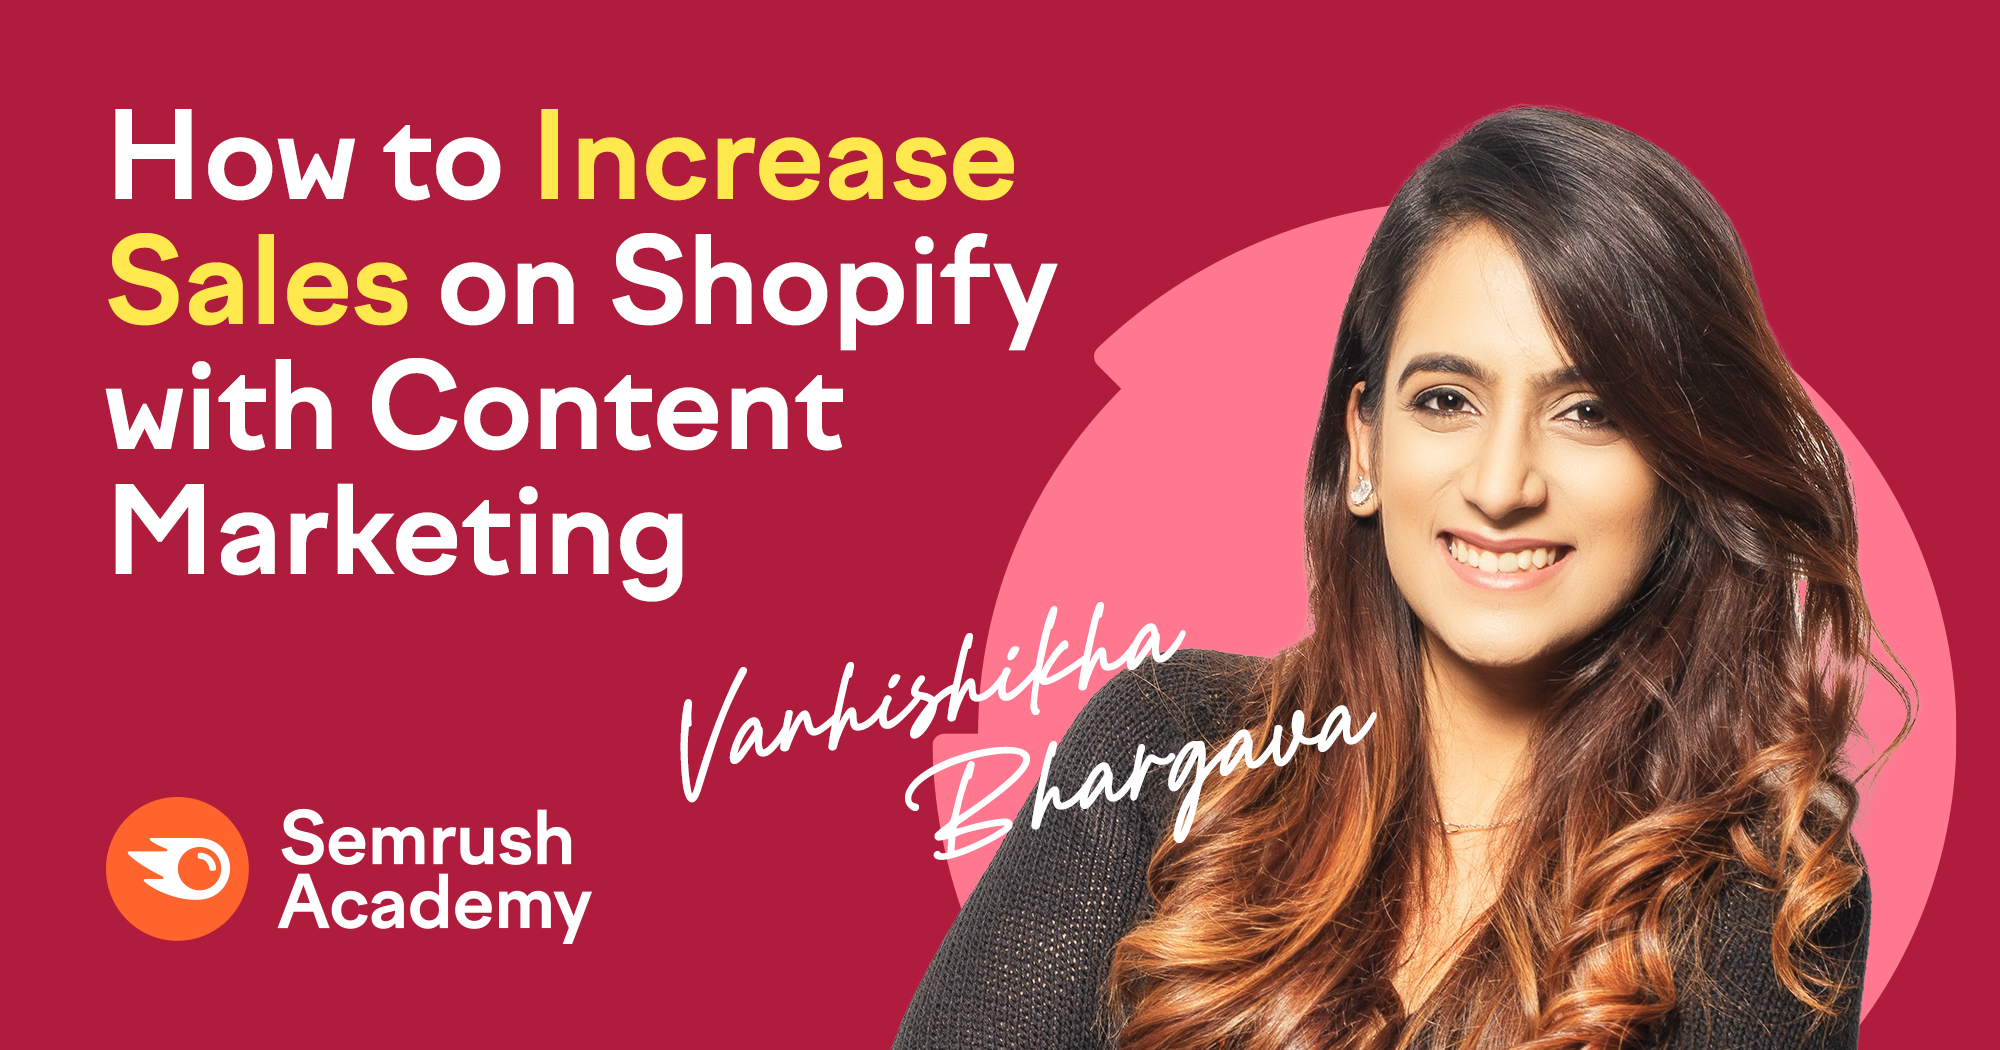 How to Increase Sales on Shopify with Content Marketing